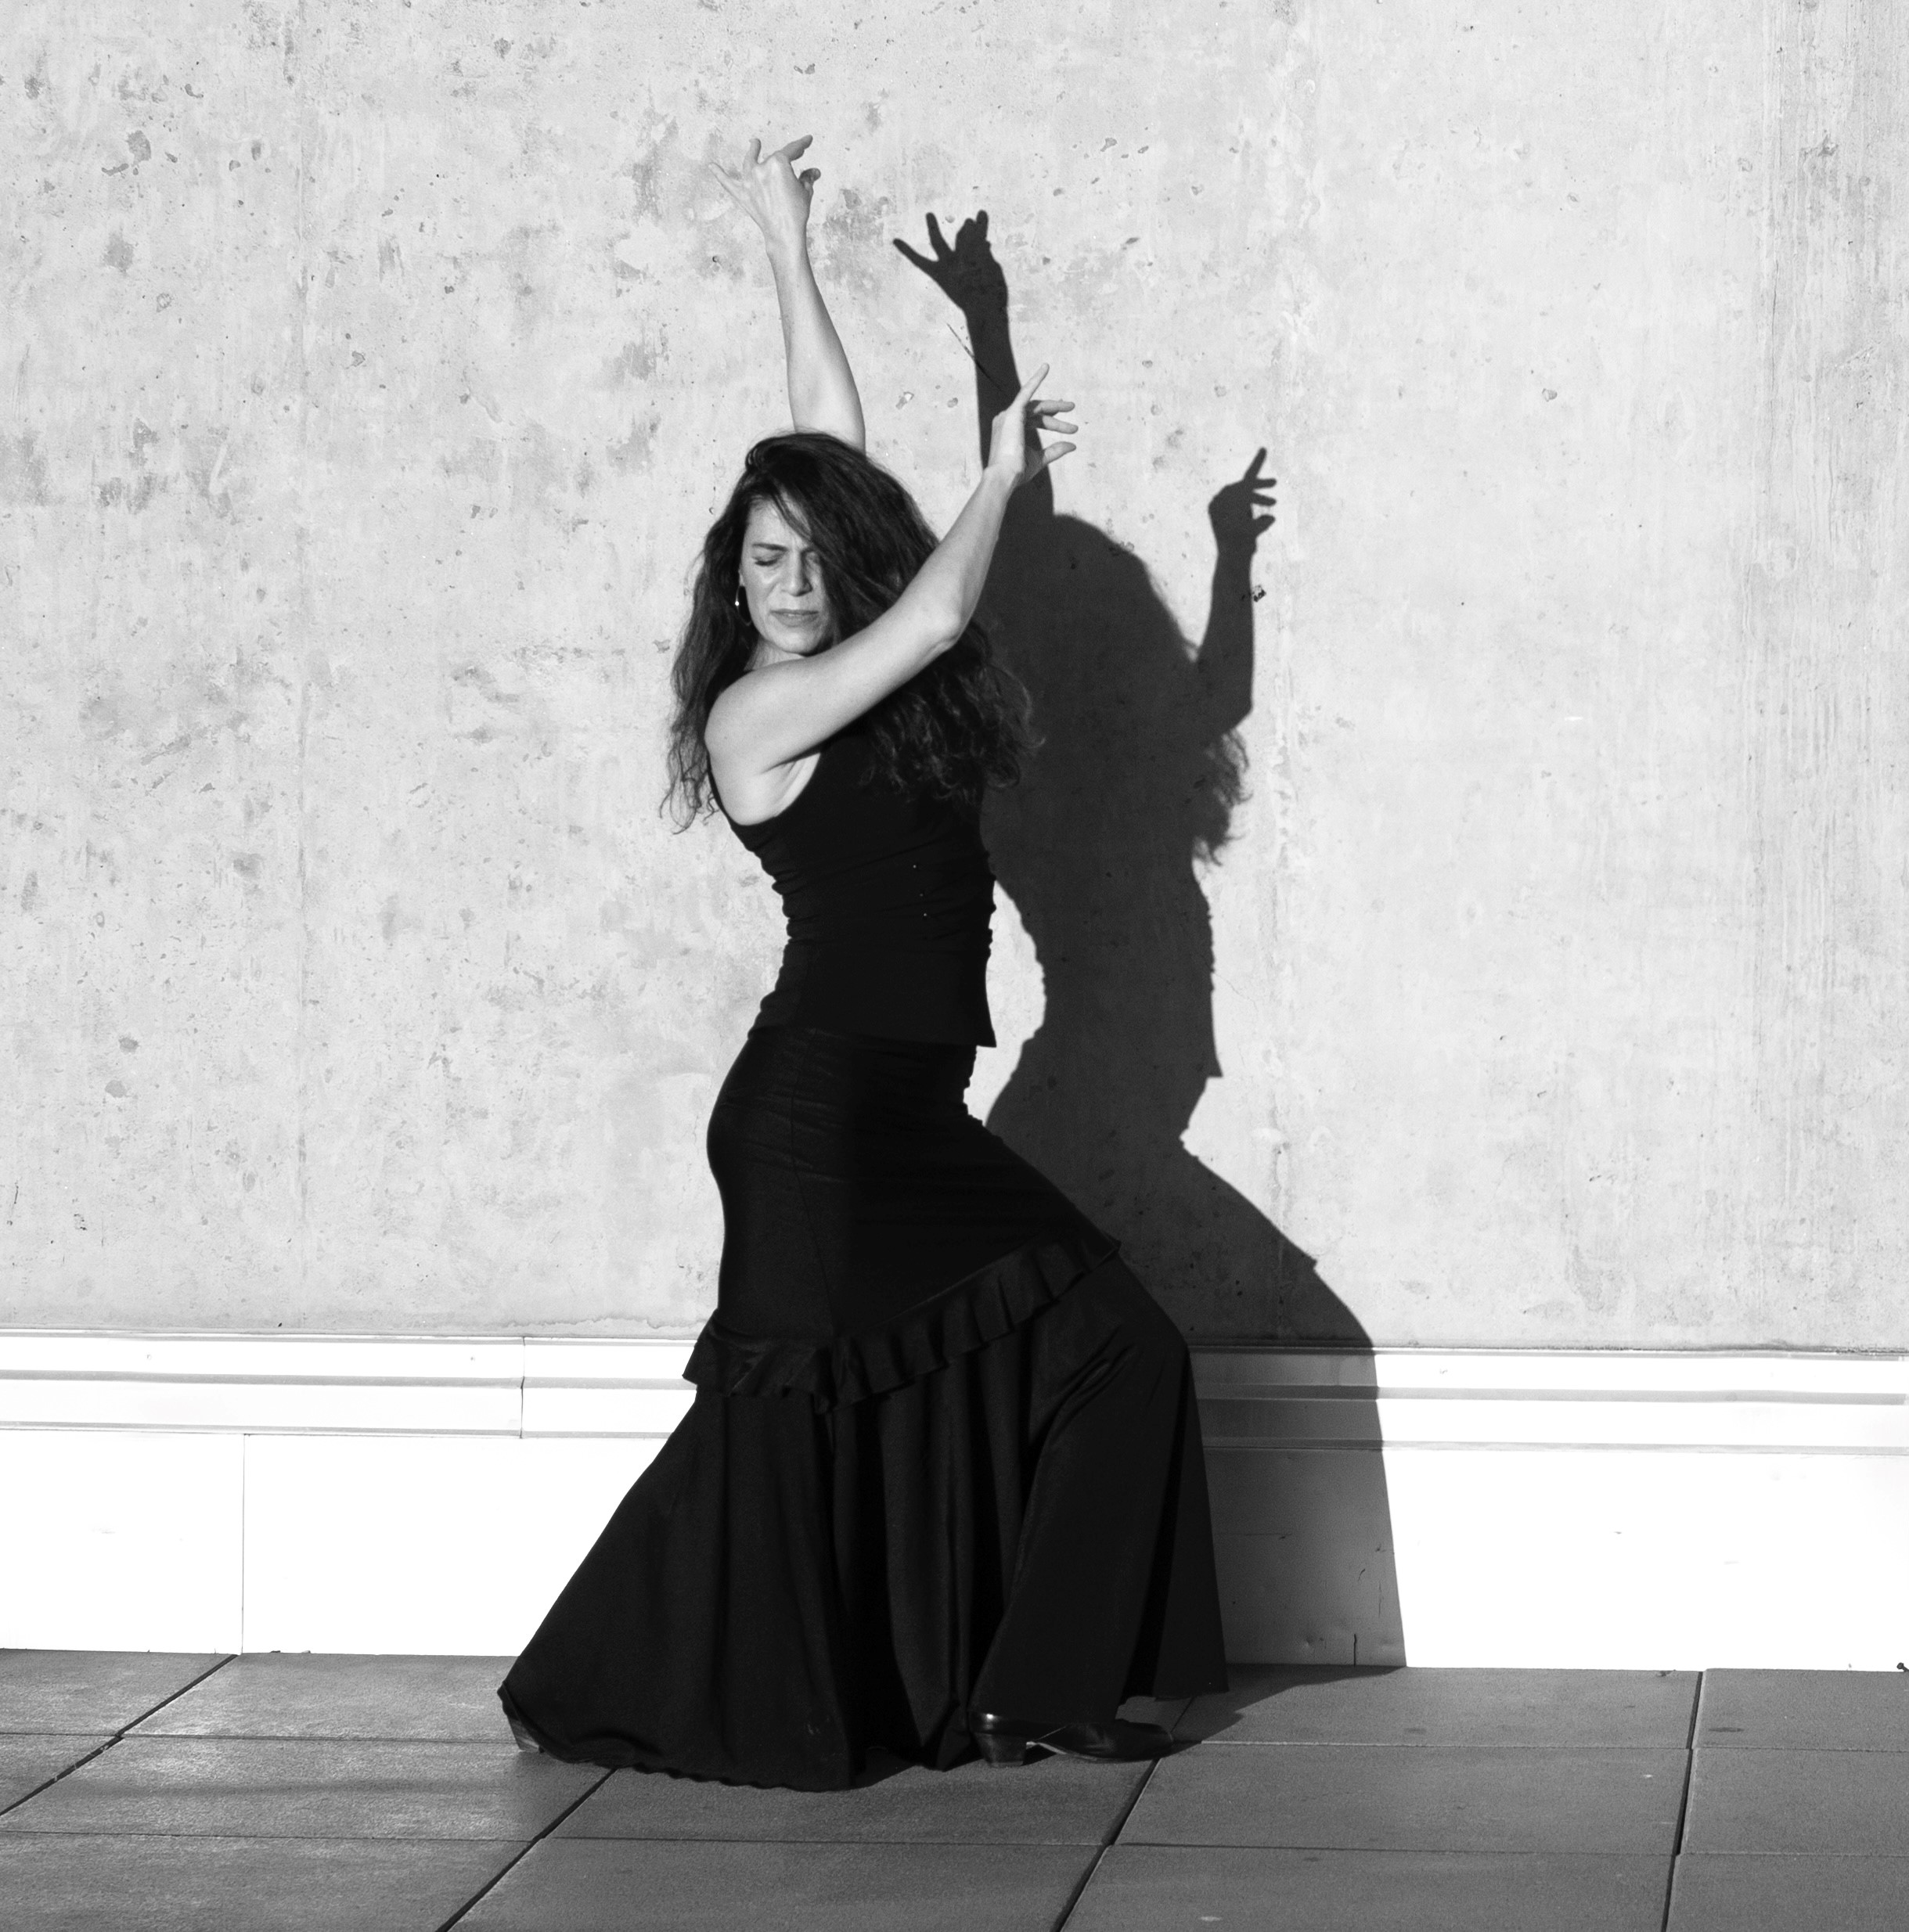 A flamenco dancer poses on a tile floor. She has a black dress on and her knees are bent with her arms extended above her head. The image is in black and white.